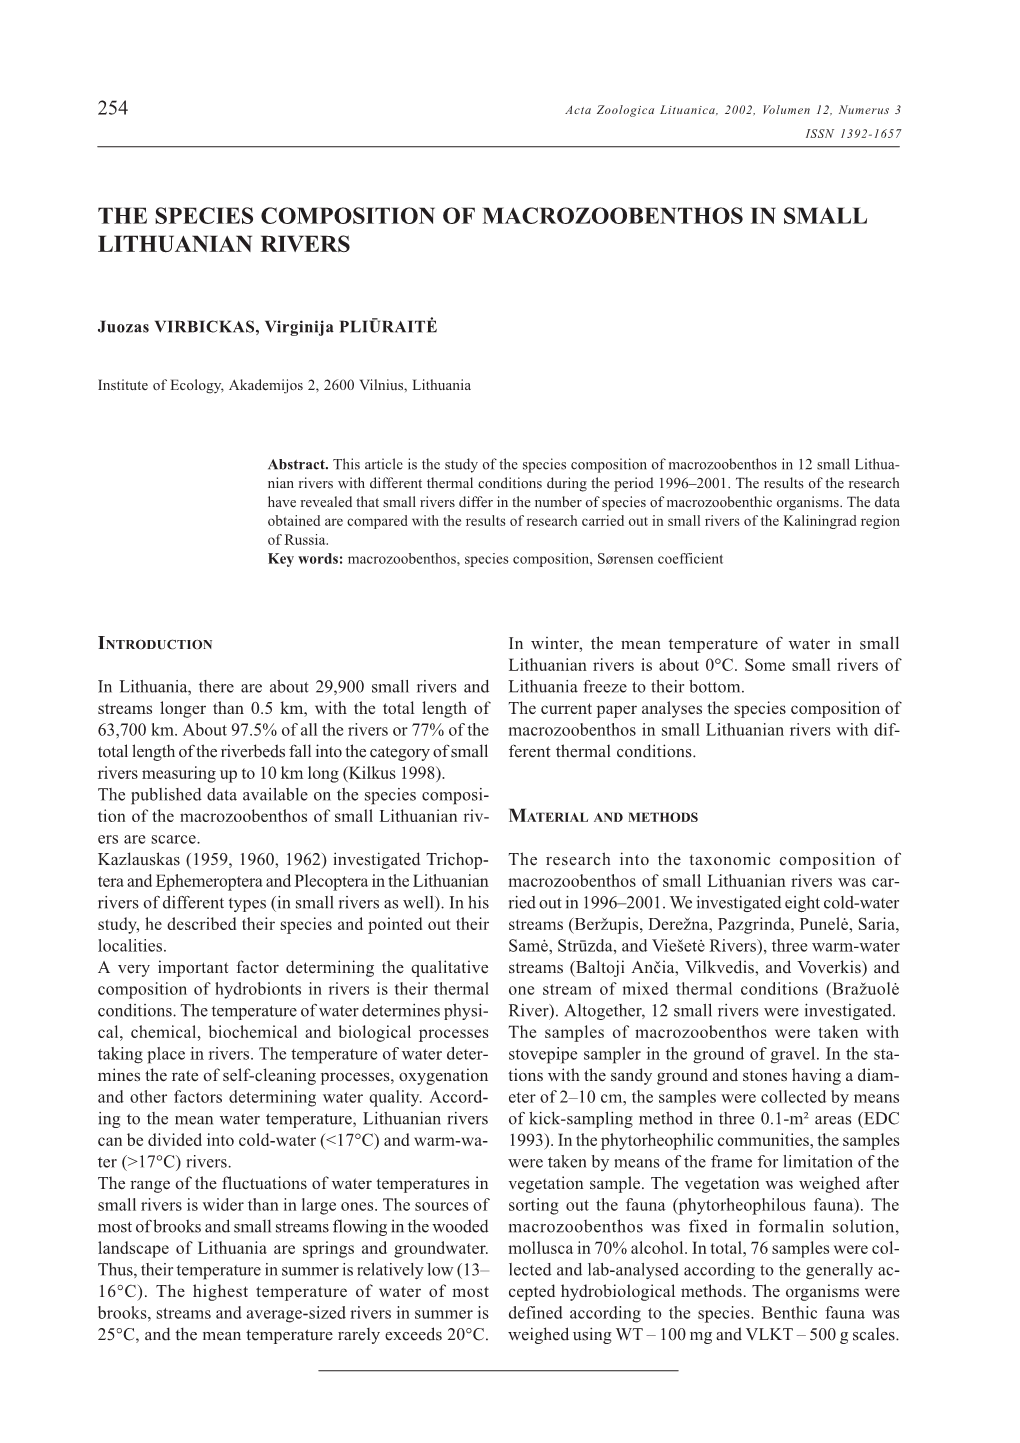 The Species Composition of Macrozoobenthos in Small Lithuanian Rivers